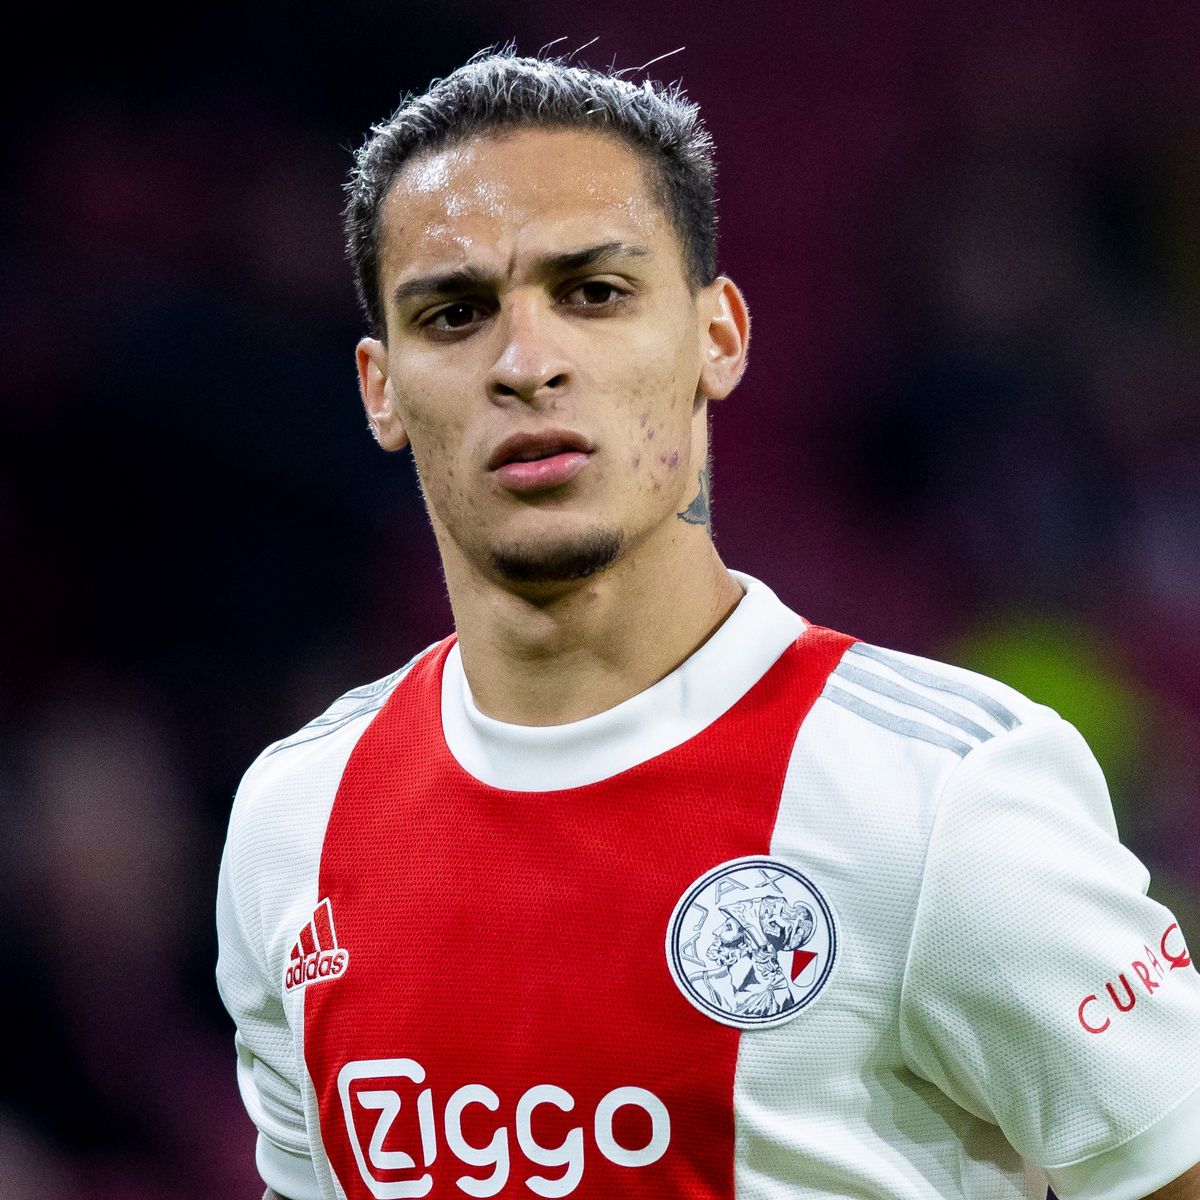                                          Ajax forward wants to join Manchester United immediately